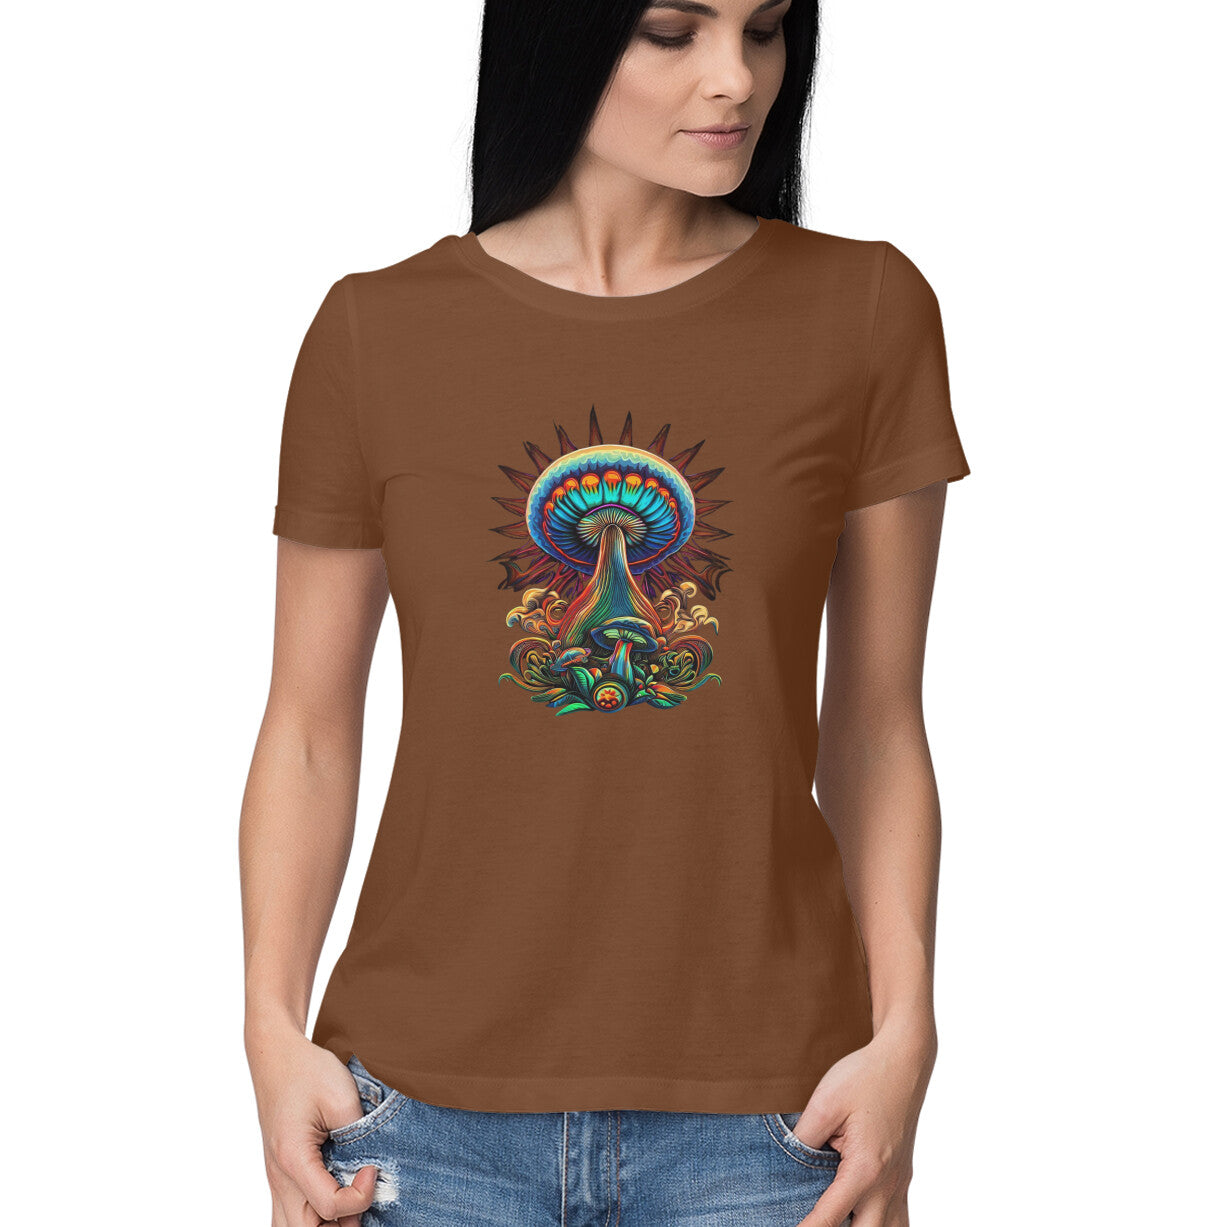 Psychedelic Mushroom: Women's Round Neck T-Shirt for Trippy Style